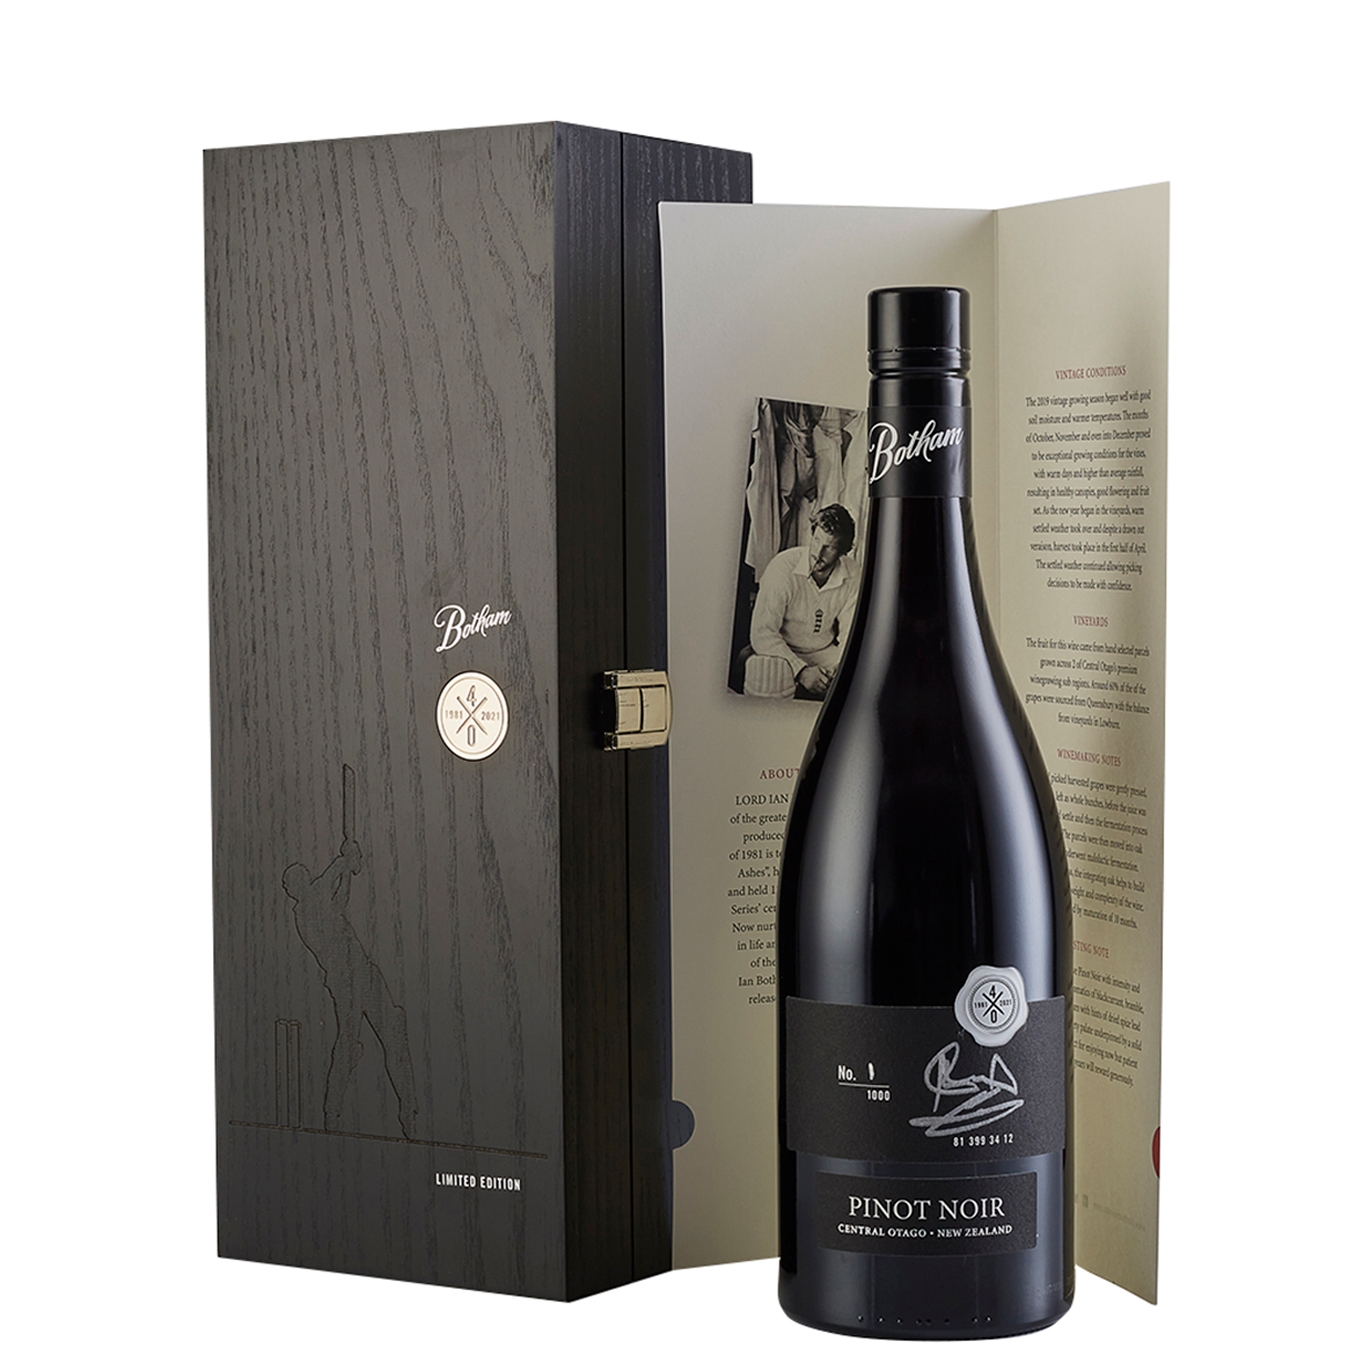 Sir Ian Botham Wines The Peerage Limited Edition Pinot Noir 2019 In Wooden Gift Box - In The Red Red Wine